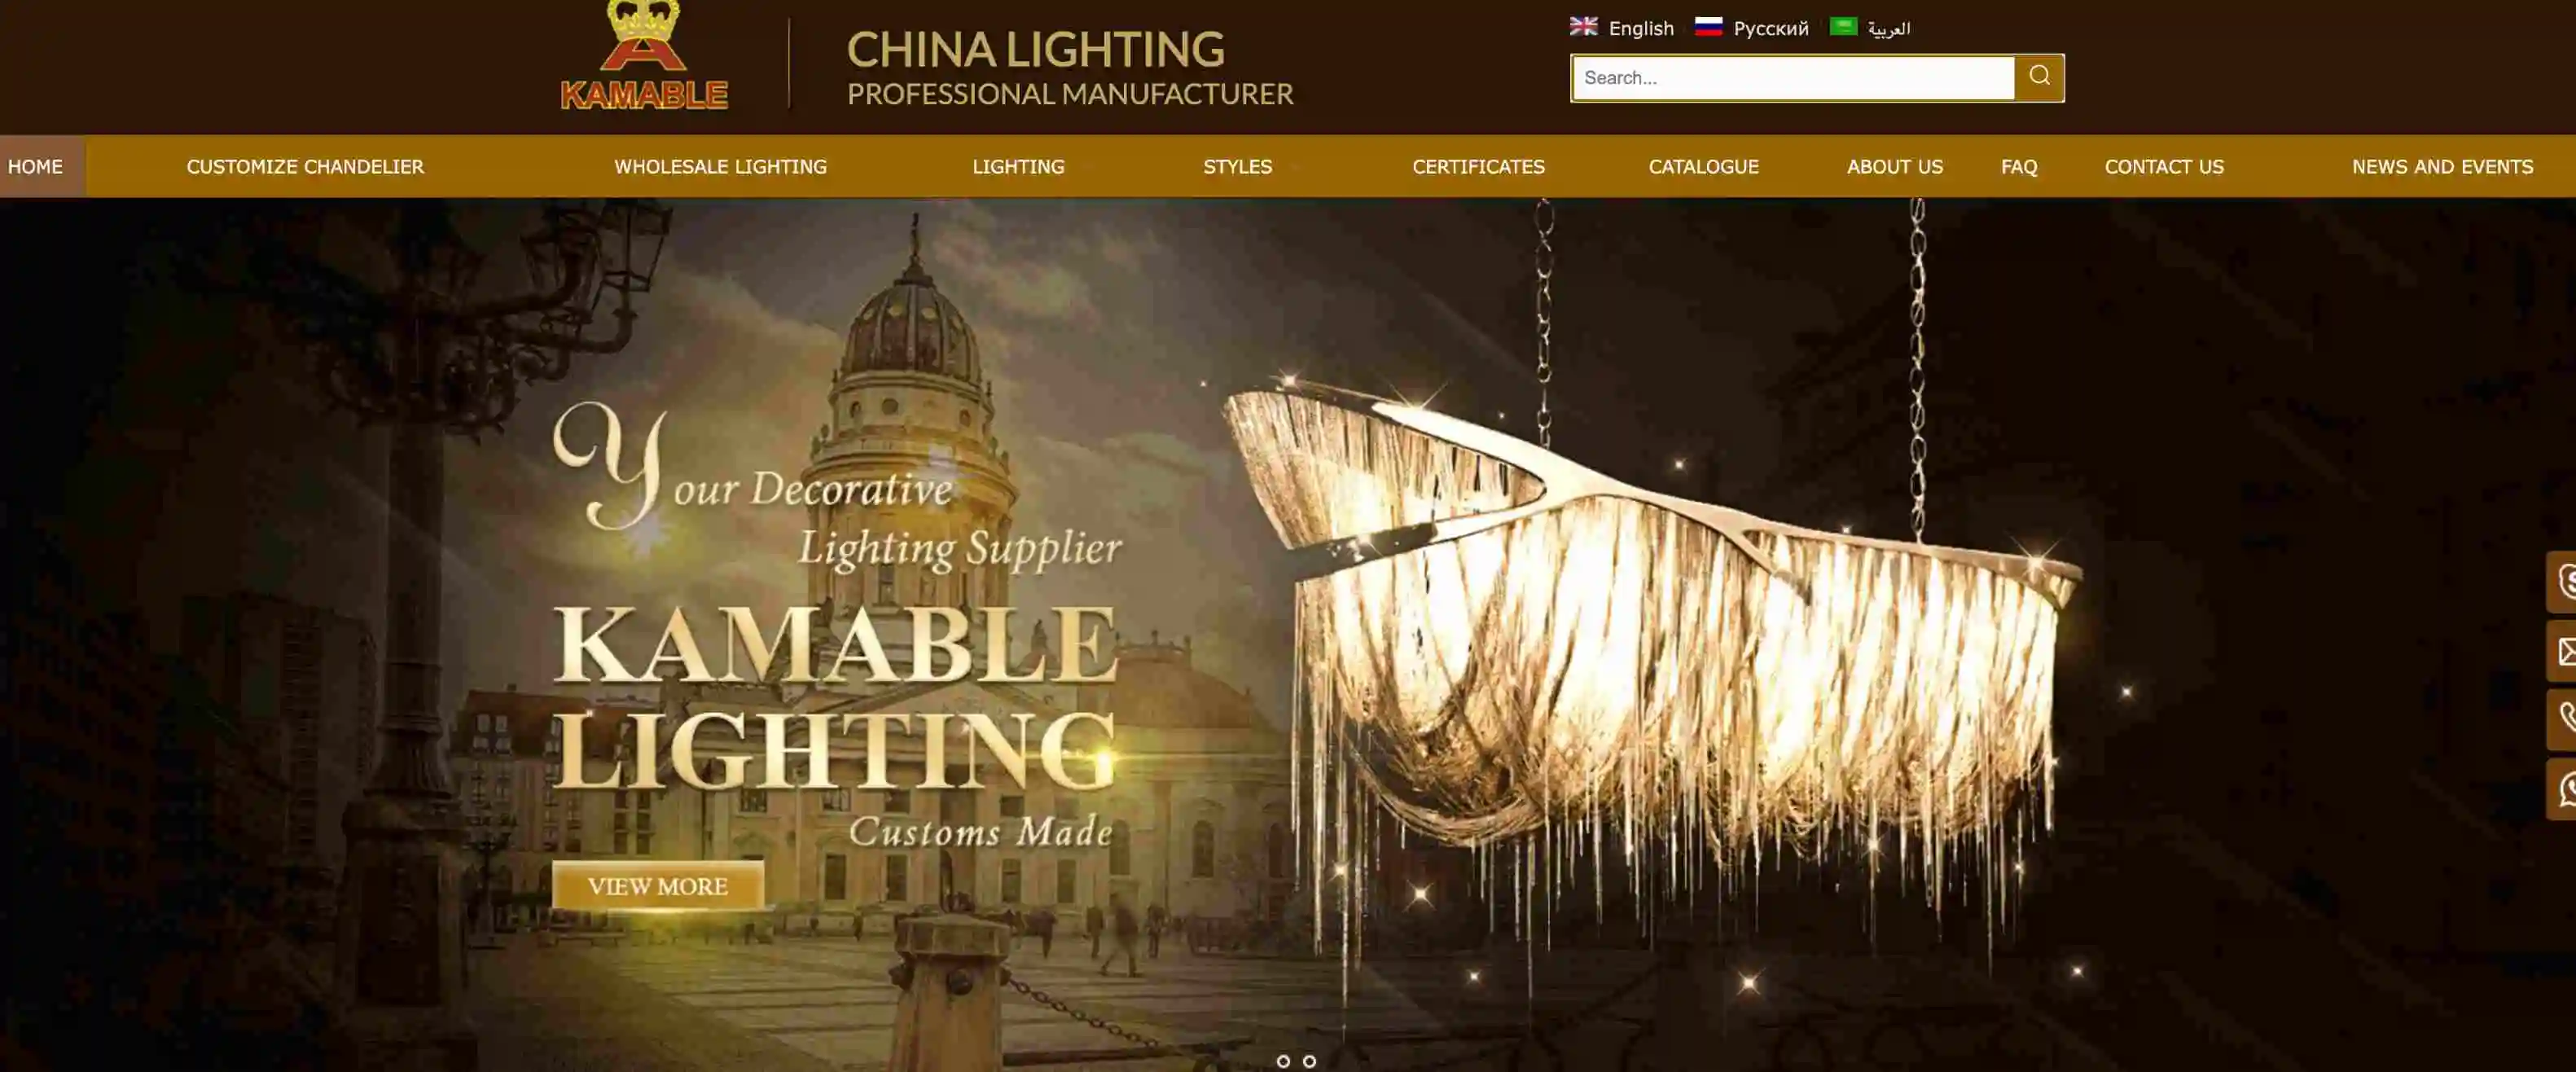 Kamable Lightings website page showcasing their products and services